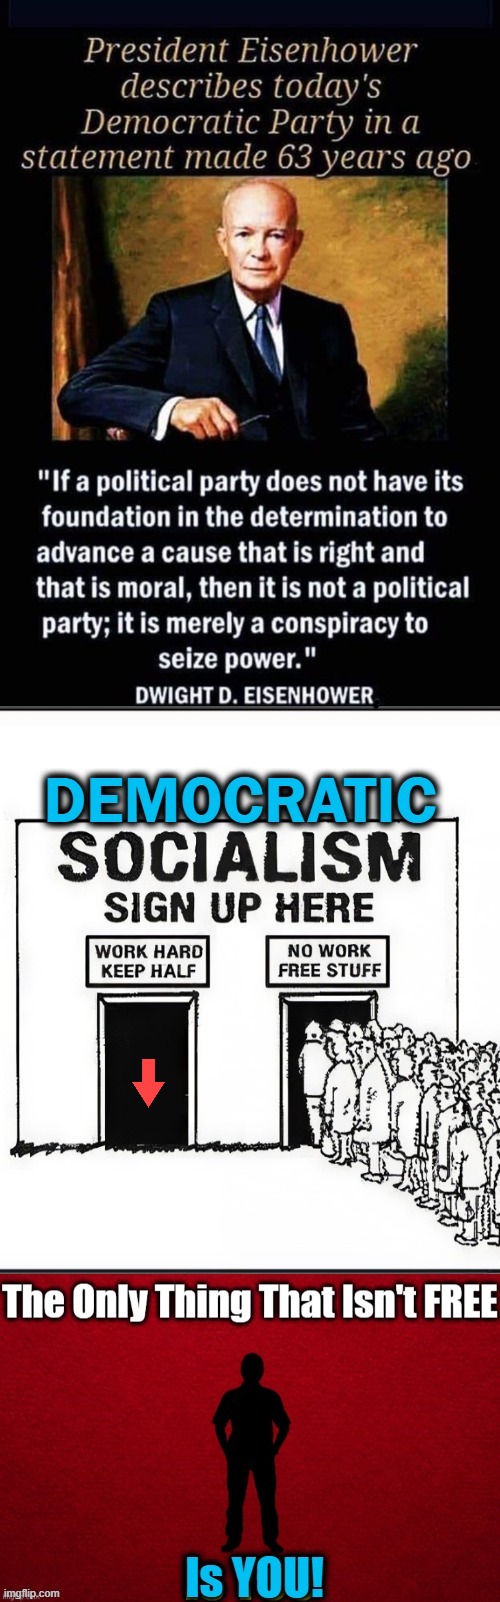 If We Can't All Be Rich, Let's Be Equally Poor! | image tagged in politics,democratic socialism,eisenhower,quote,sad truth,free stuff not freedom | made w/ Imgflip meme maker